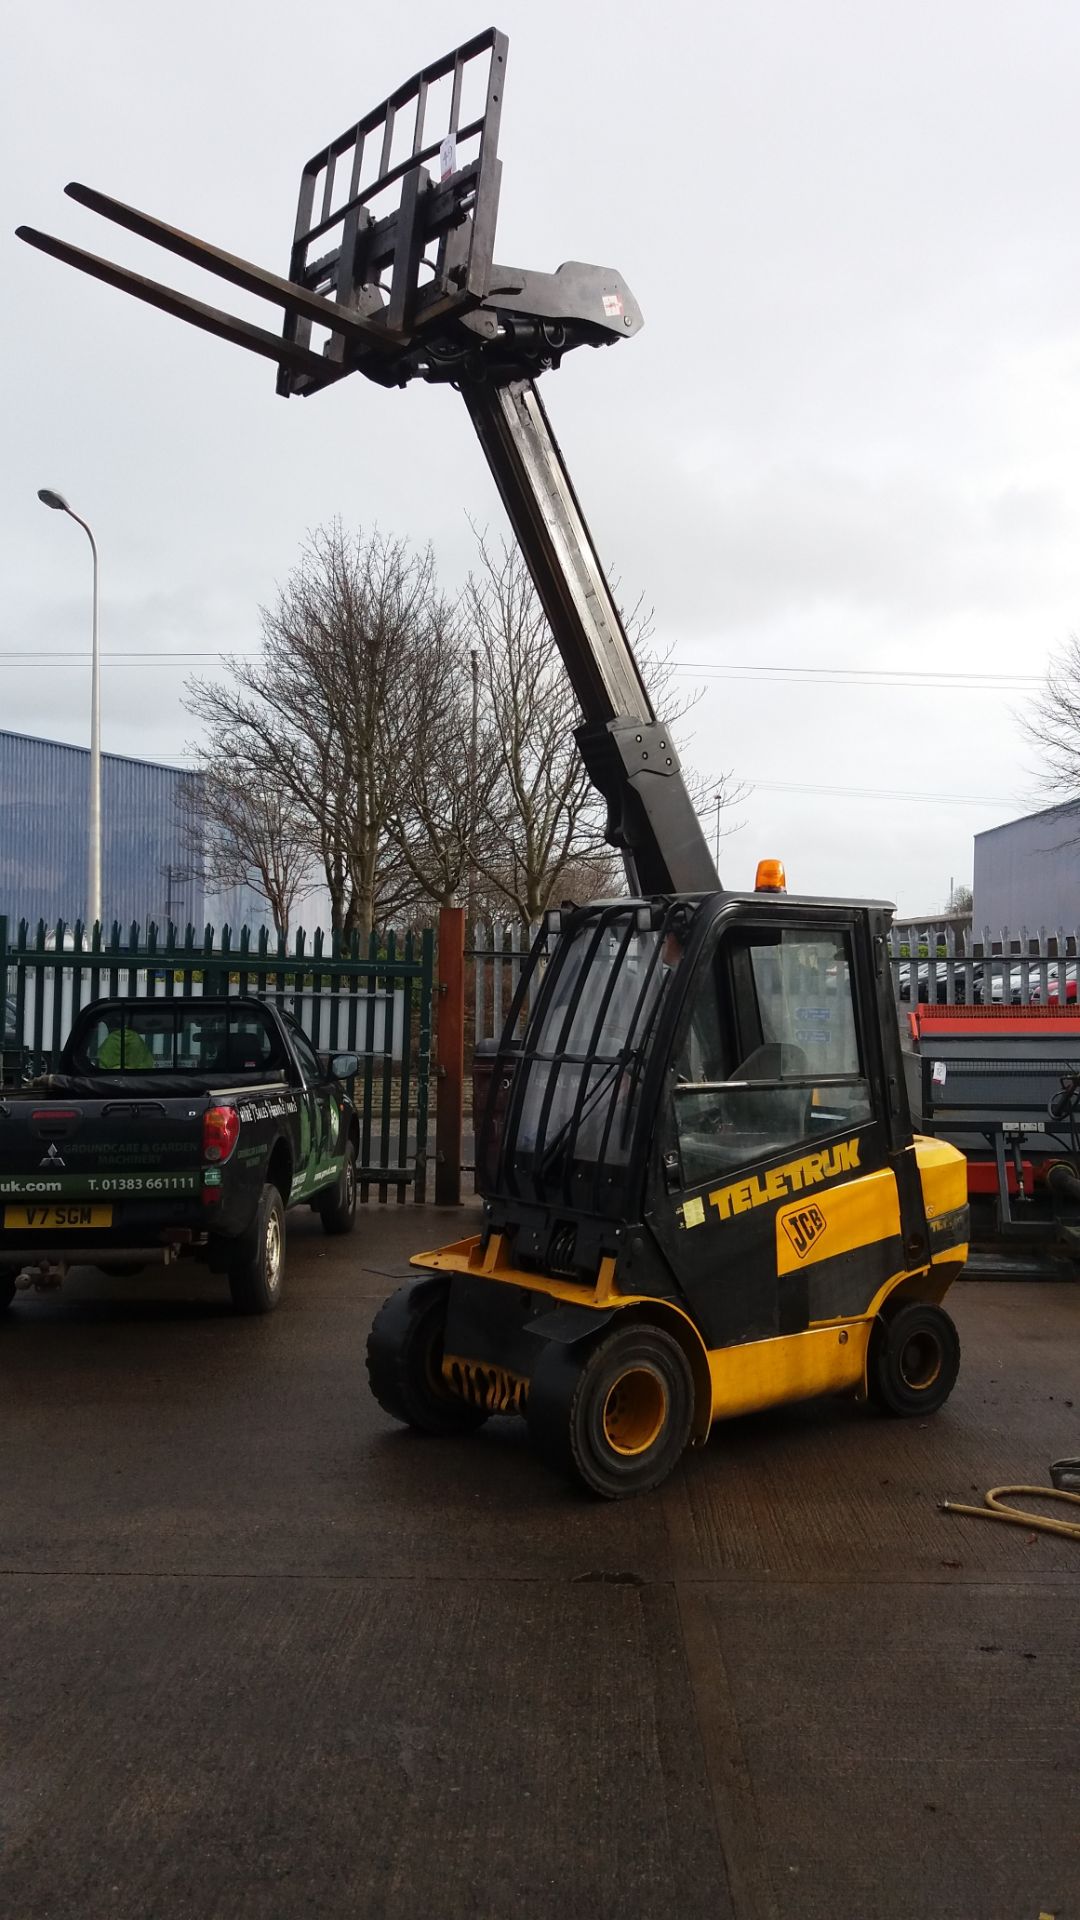 JCB TLT30 Teletruk counterbalance forklift with telescopic boom - Image 12 of 22